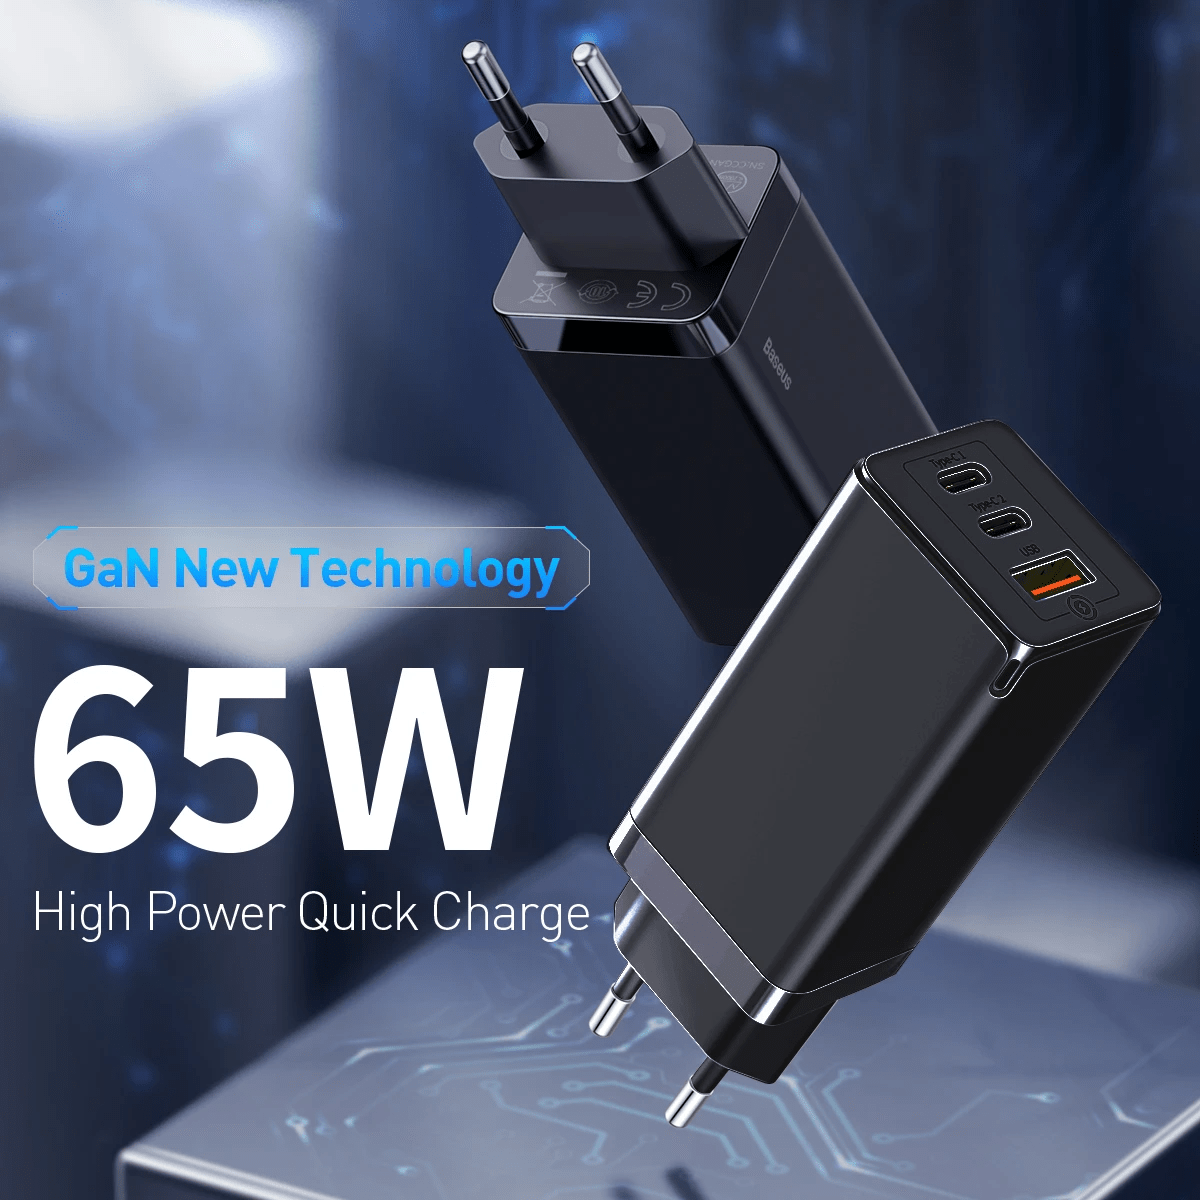 BASEUS 65W GAN 2 PRO FAST CHARGER WITH 100W -C TO C CABLE